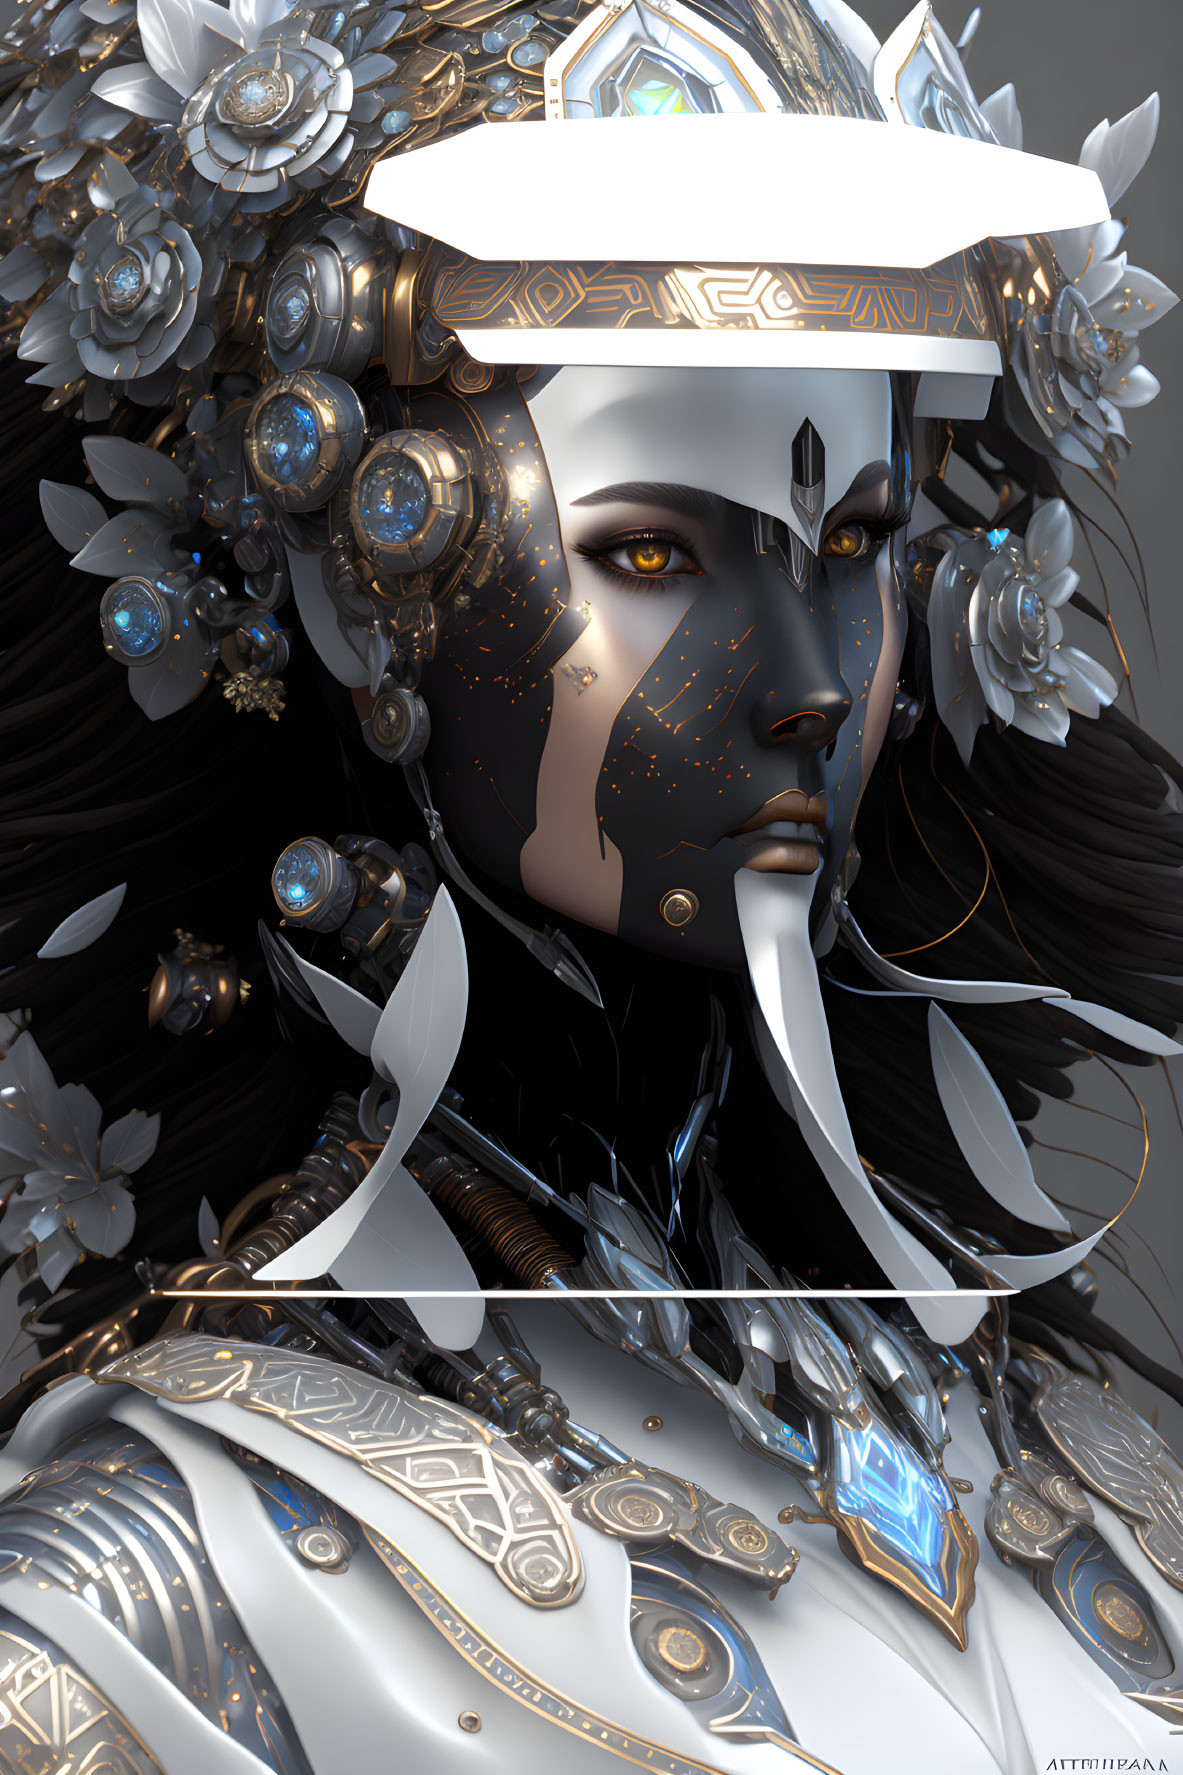 Detailed digital art portrait of female figure with metallic skin and intricate silver and white armor and floral decorations,